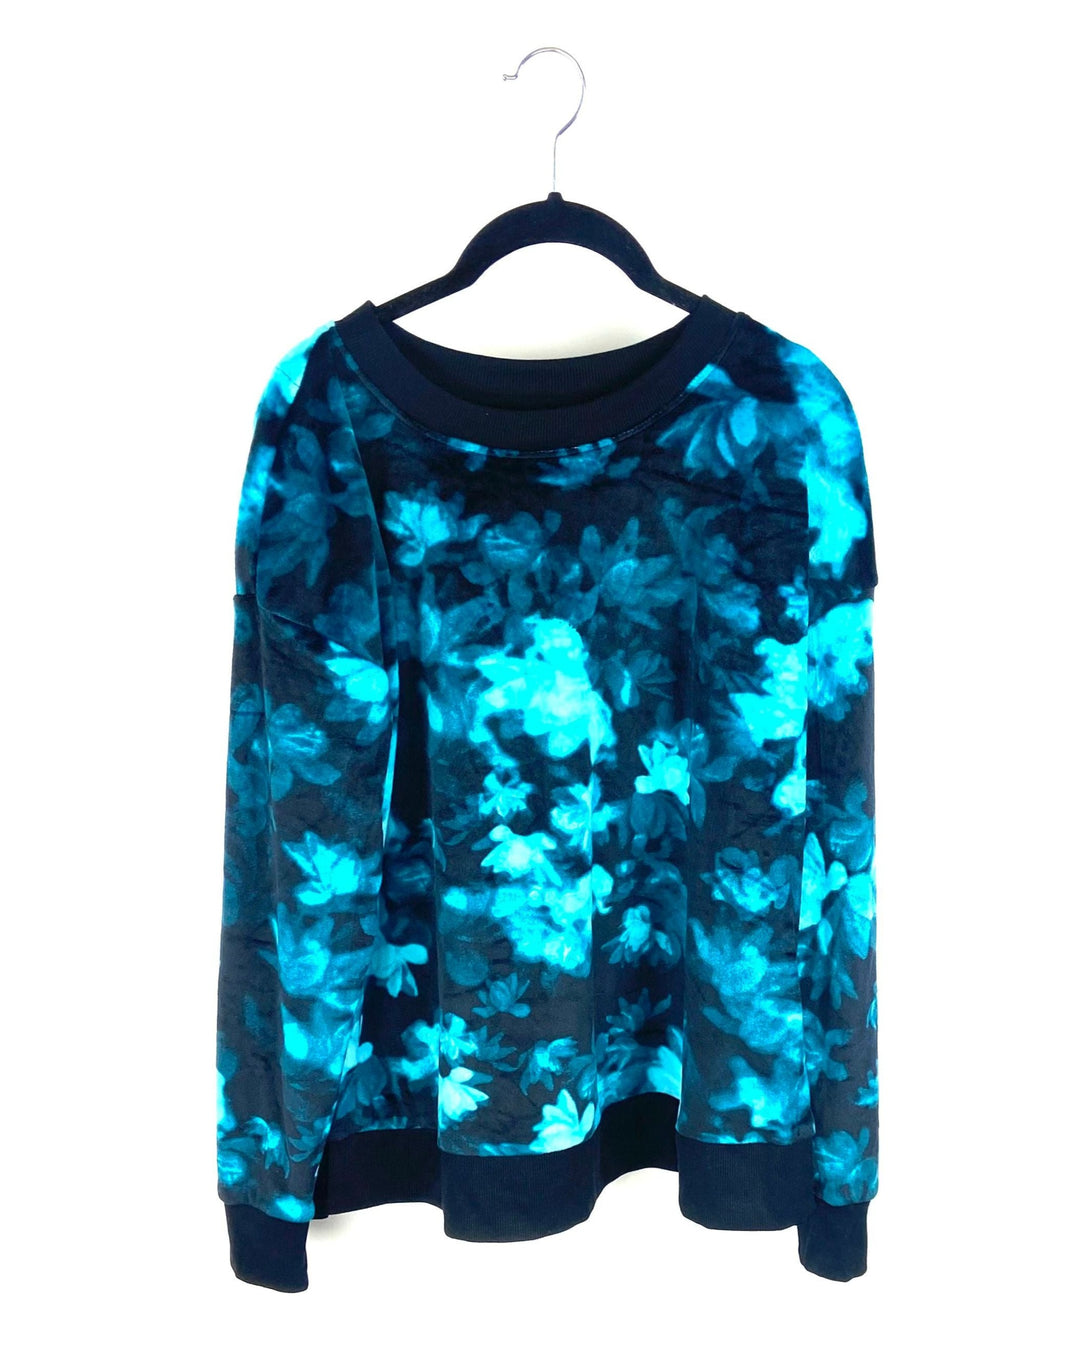 Blue And Black Fleece Top - Small